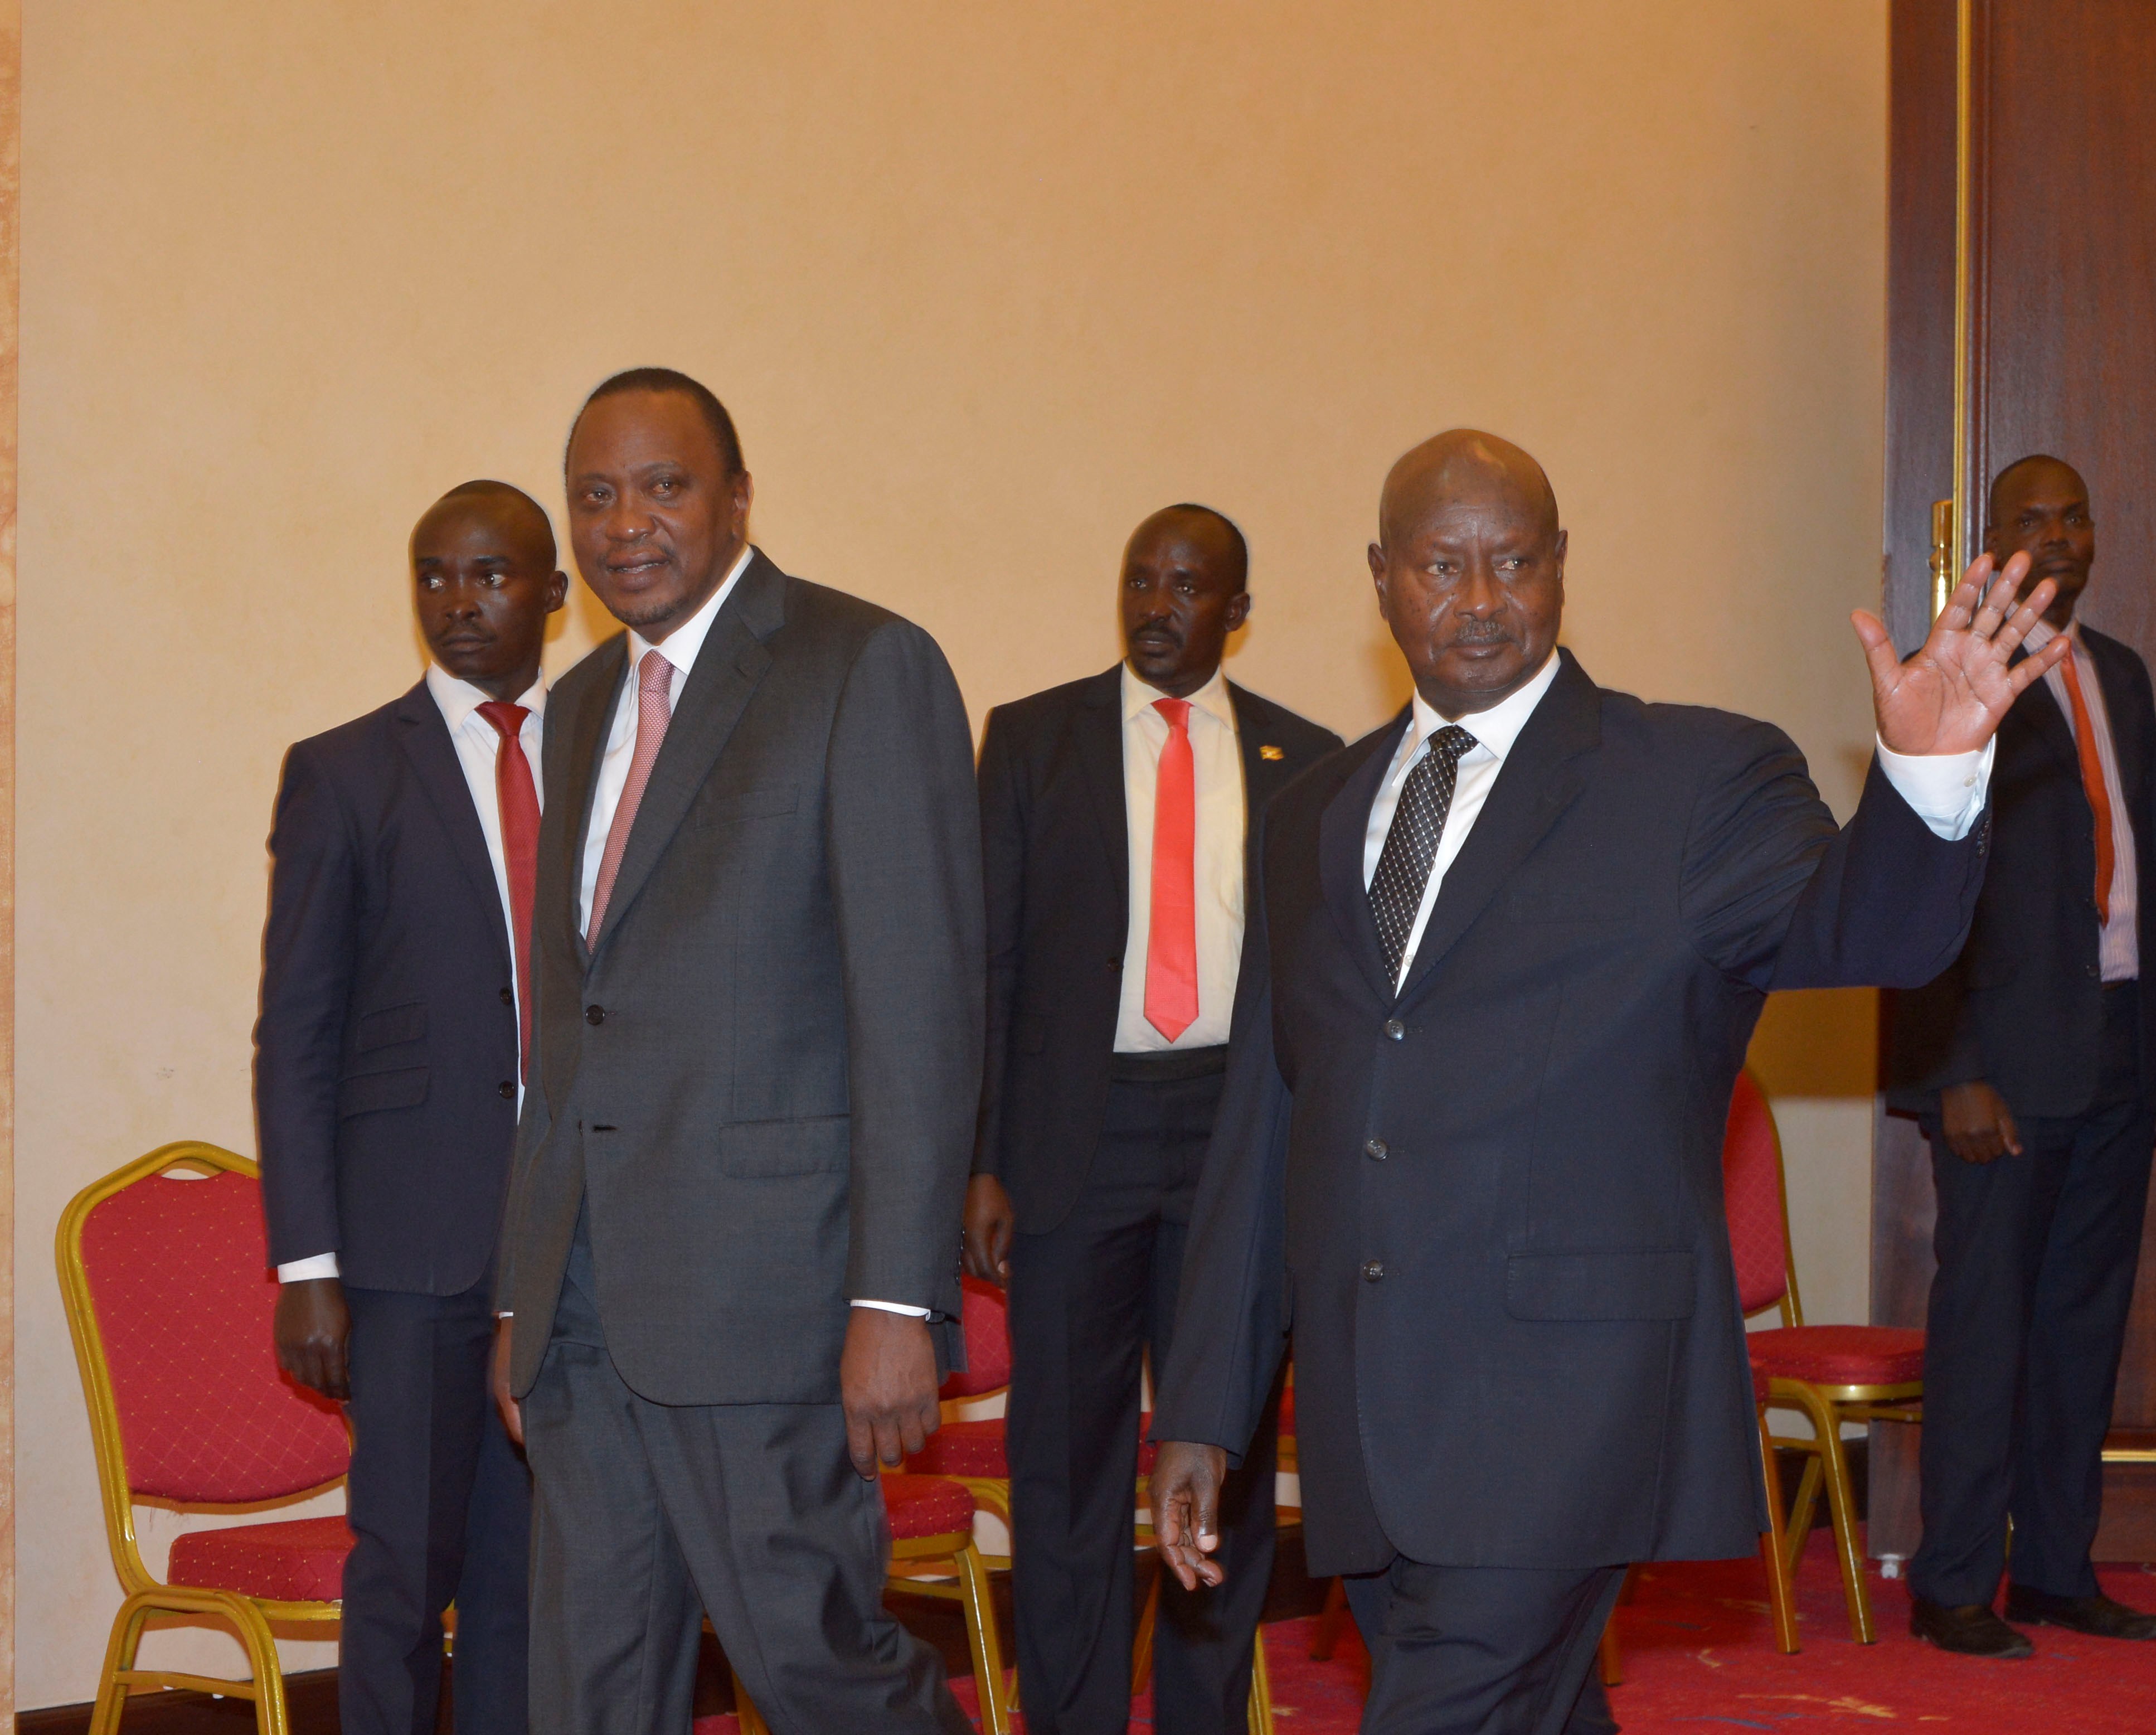 President Museveni and his guest President Uhuru arrive for dinner.